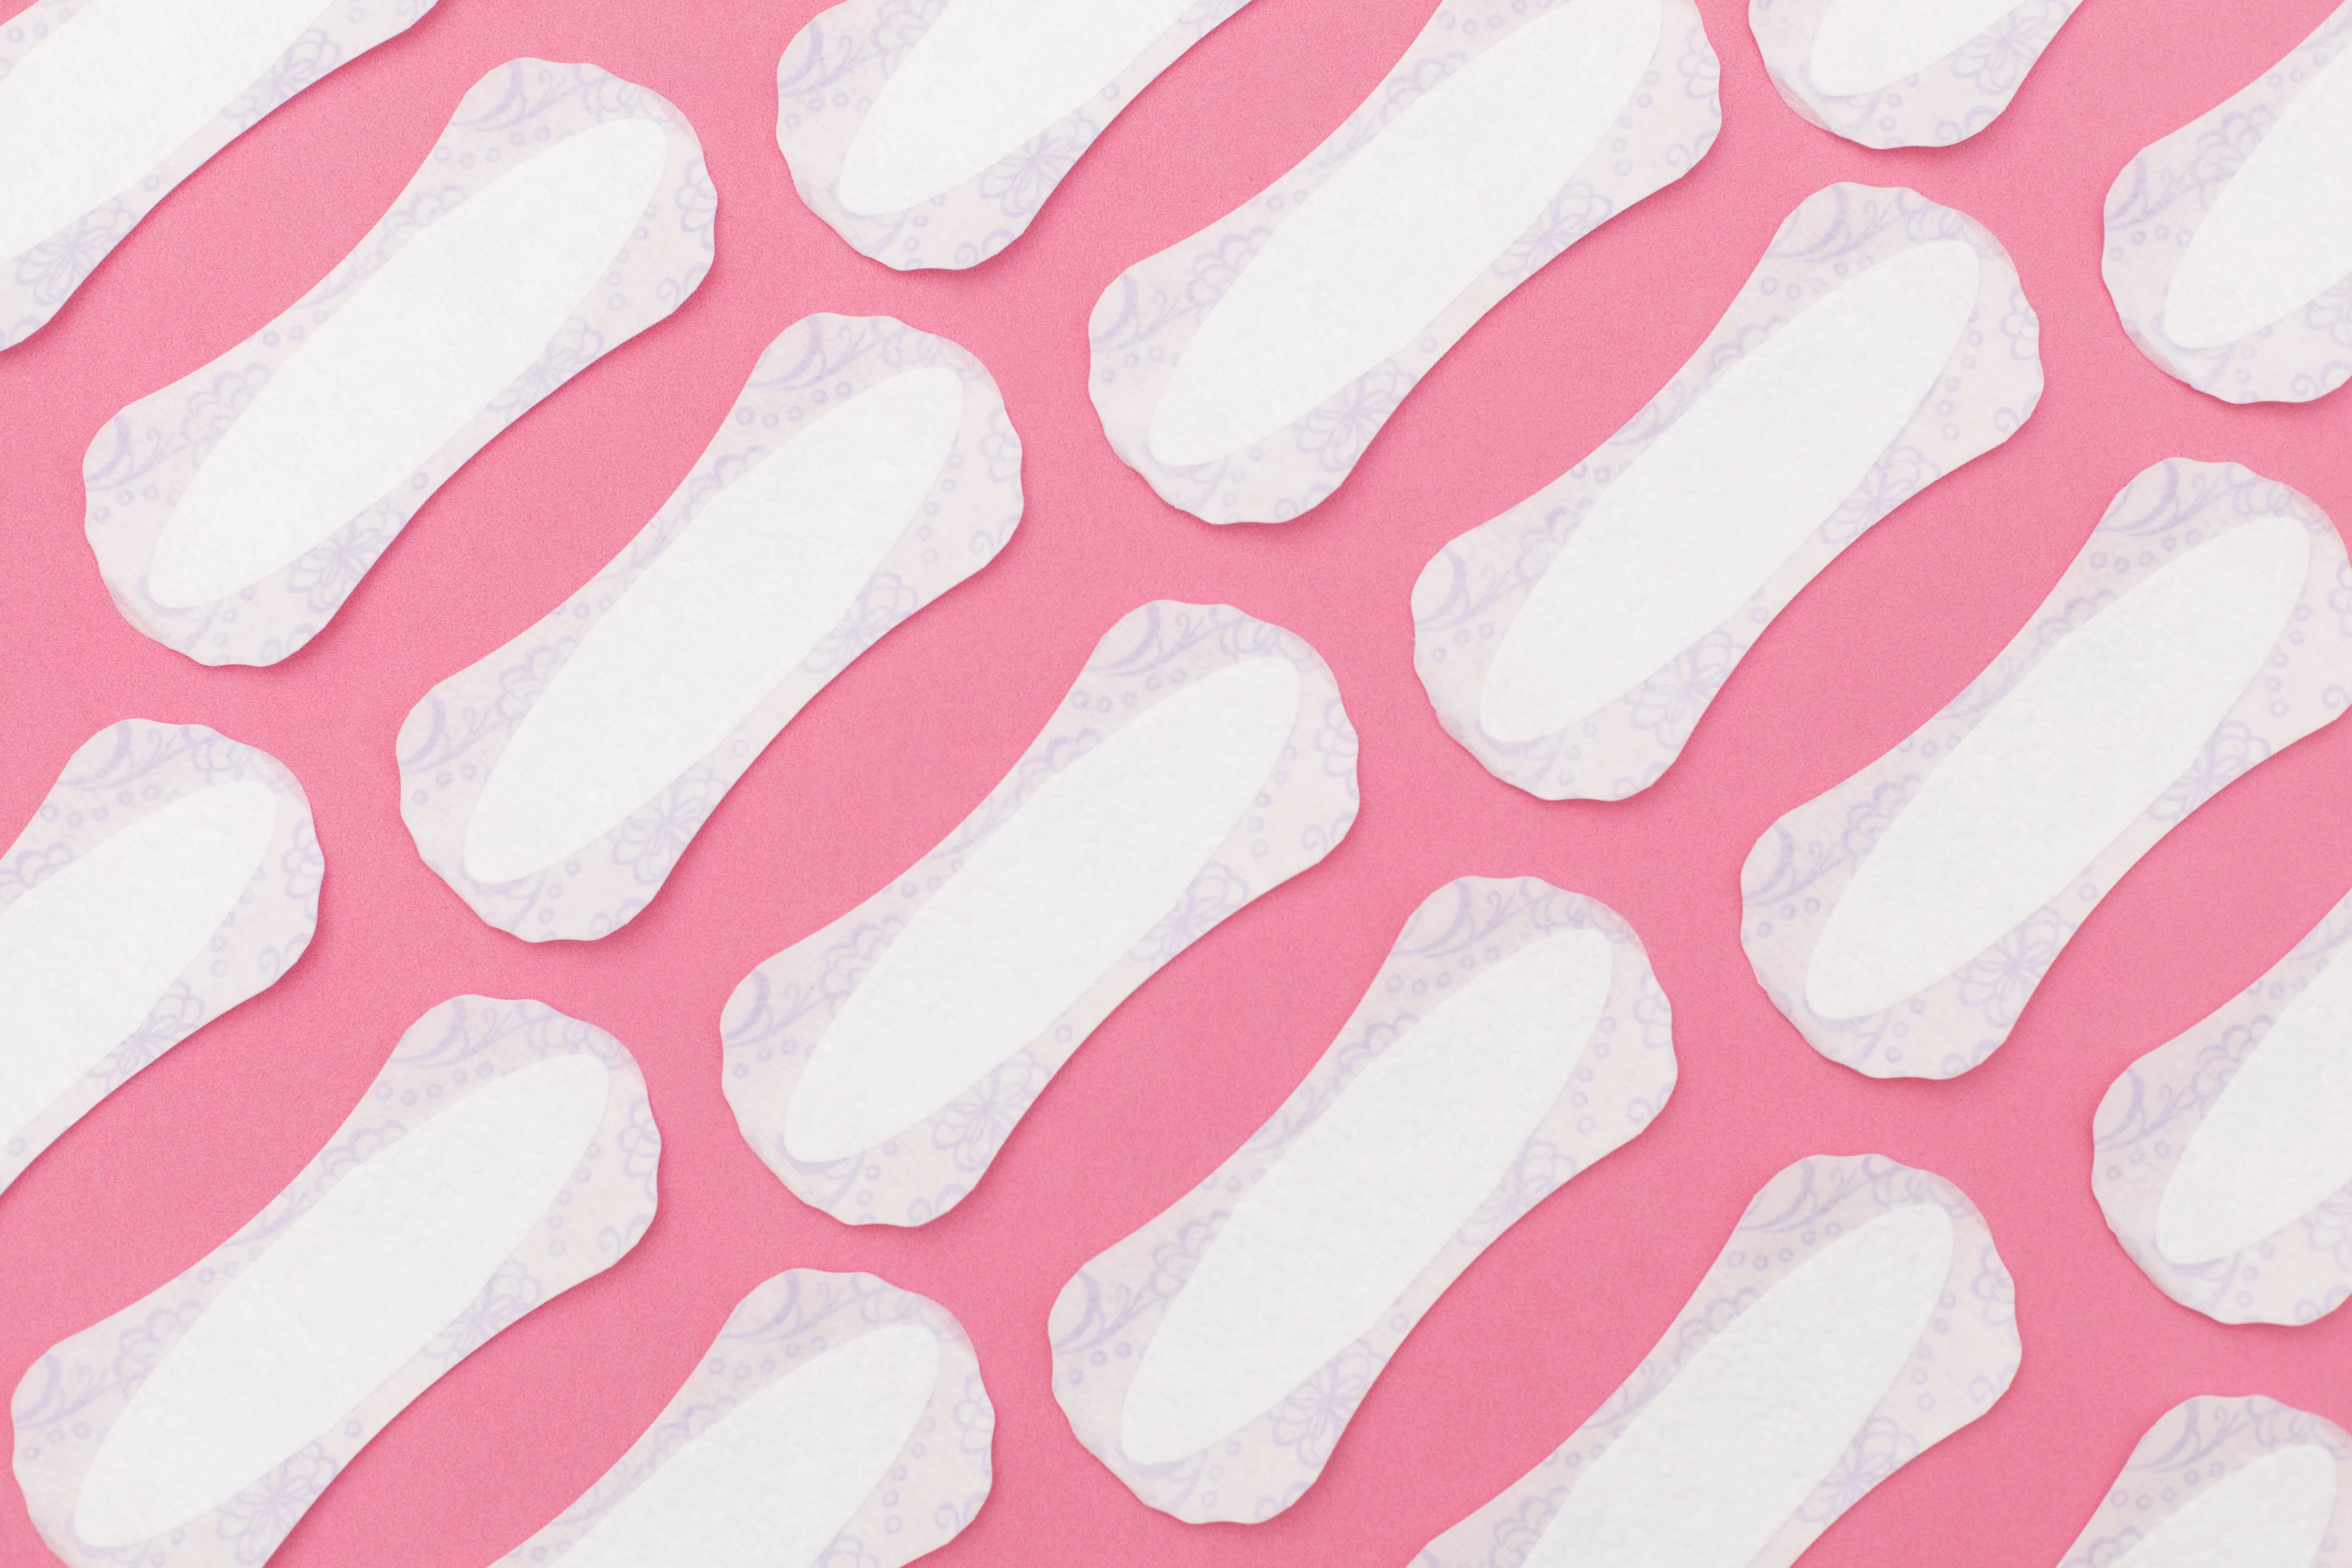 Pantyliners on a pink background